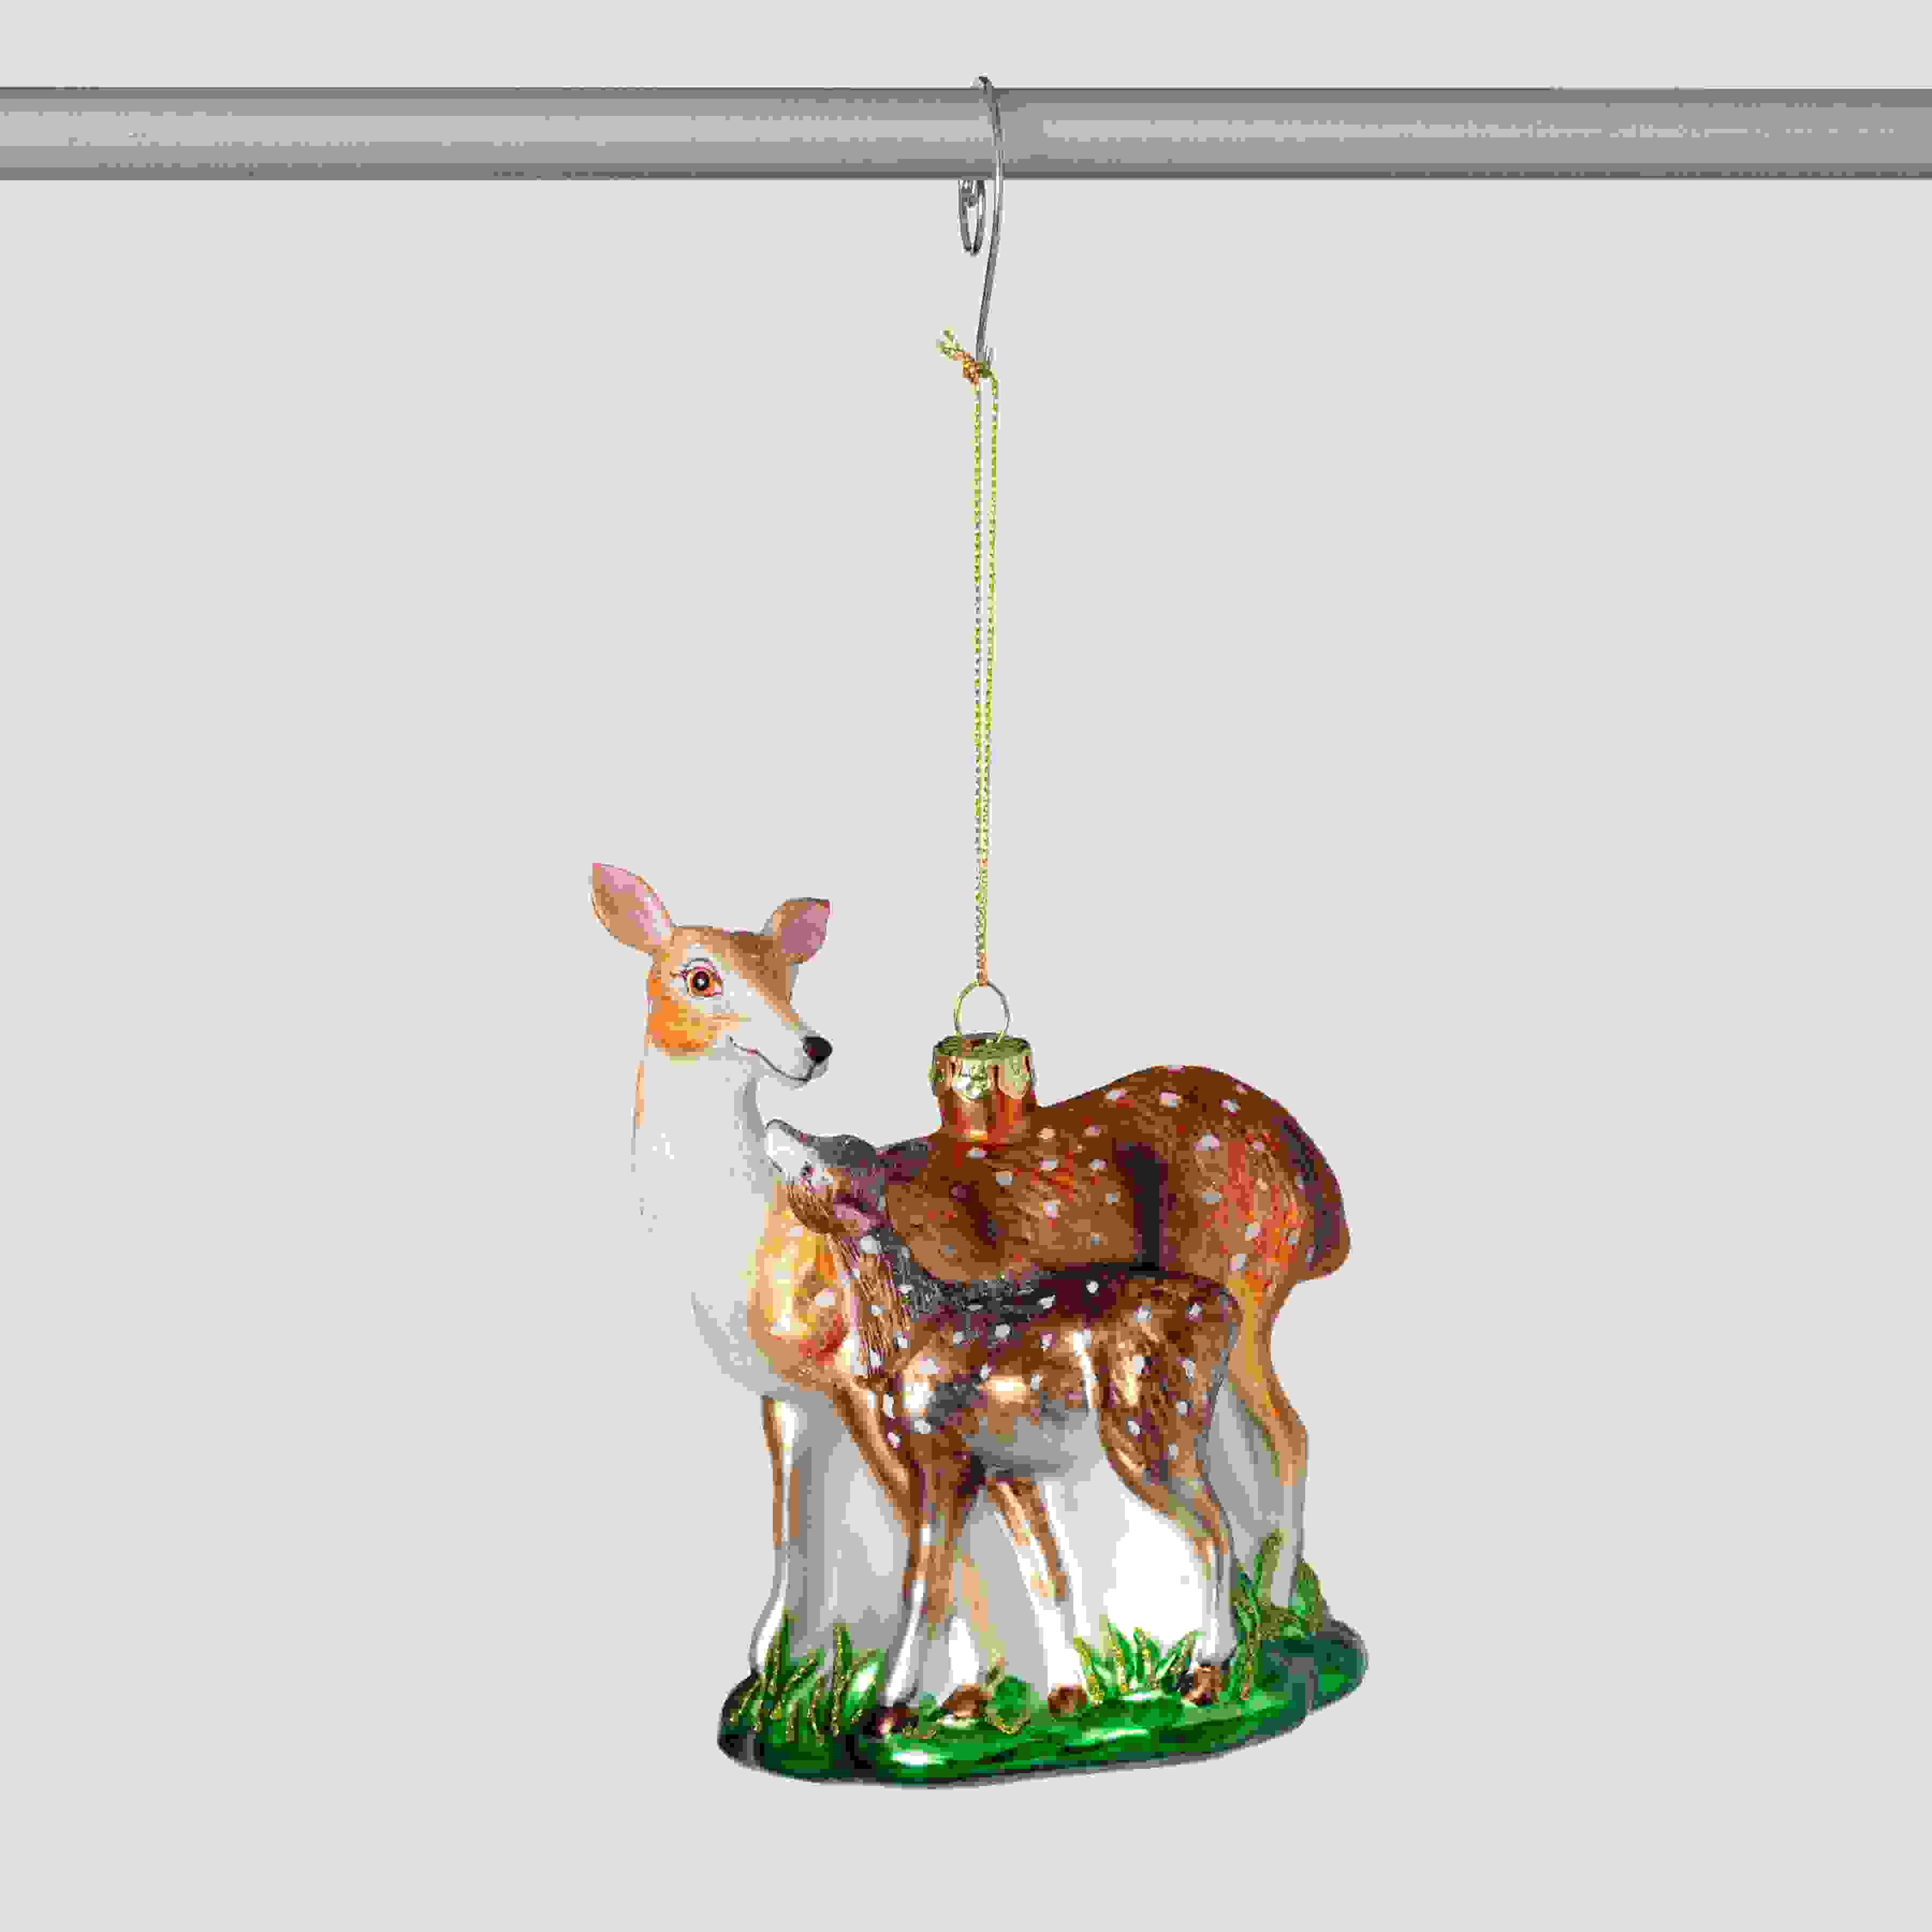 RETRO SPOTTED DEER ORNAMENT